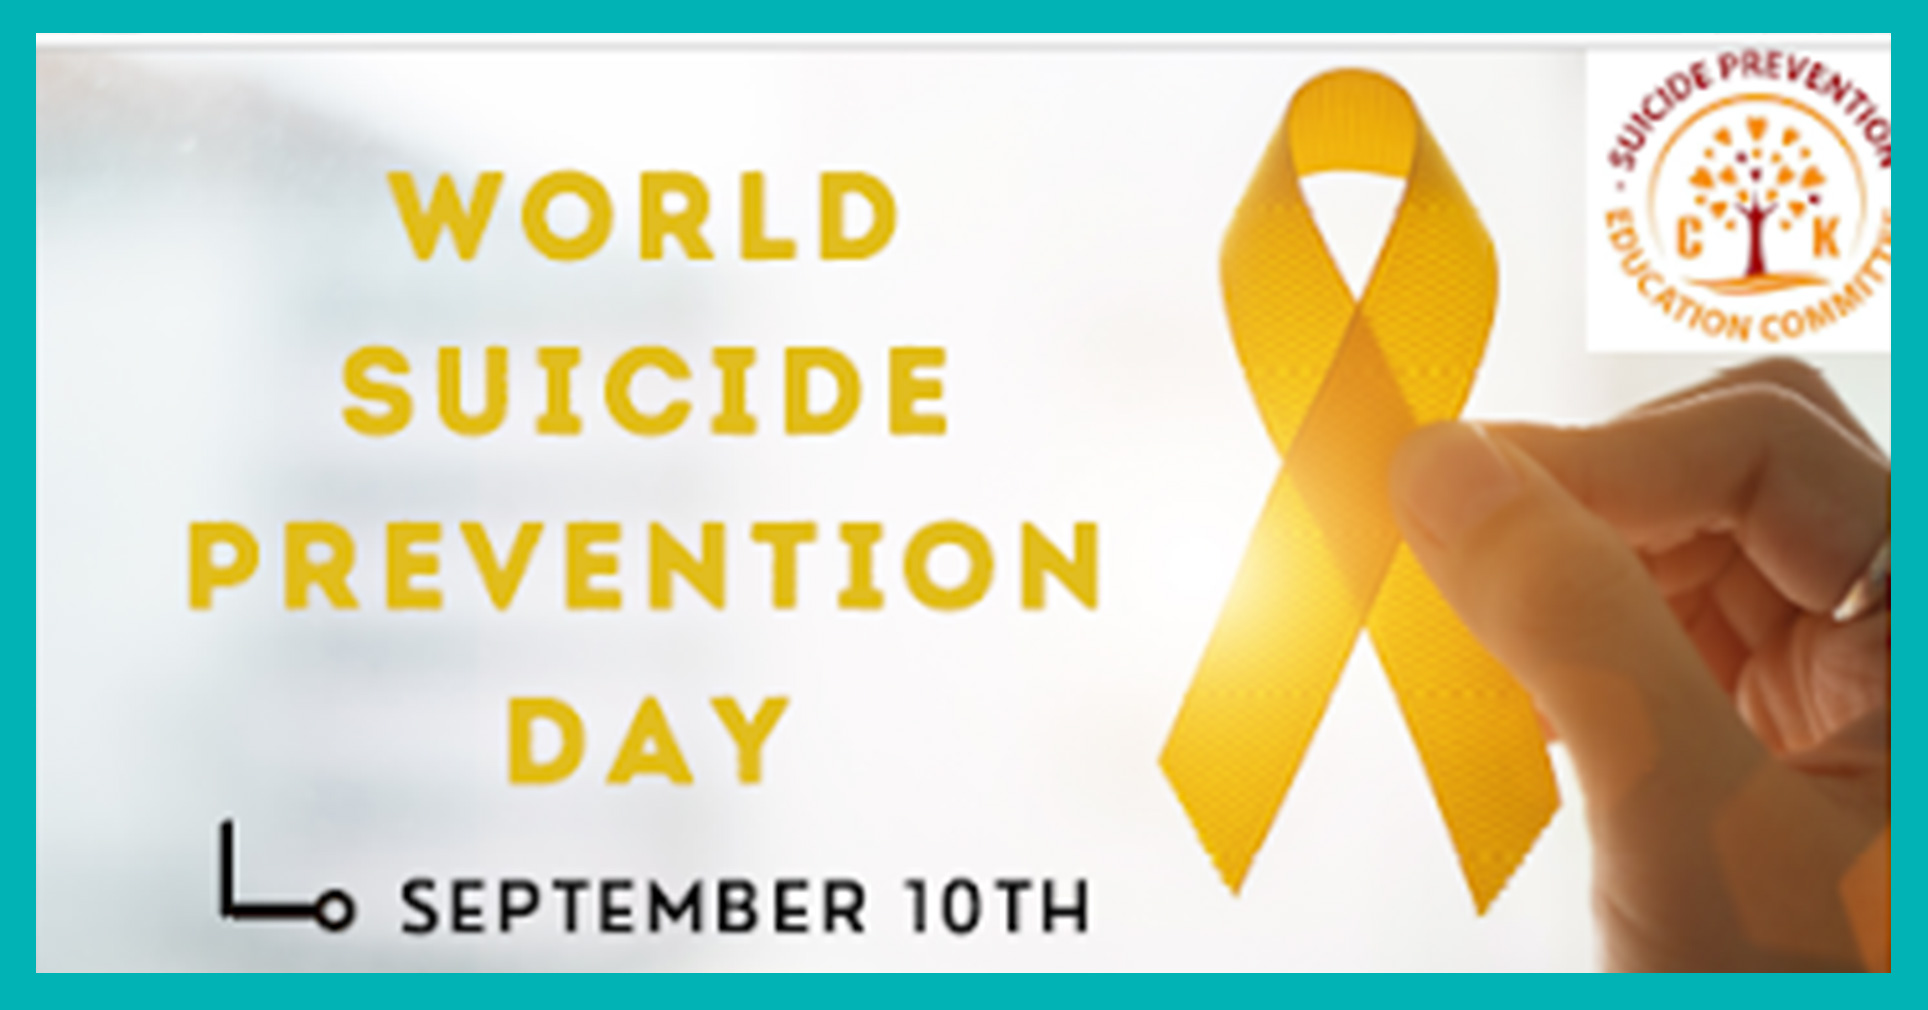 World Suicide Prevention Day is September 10th